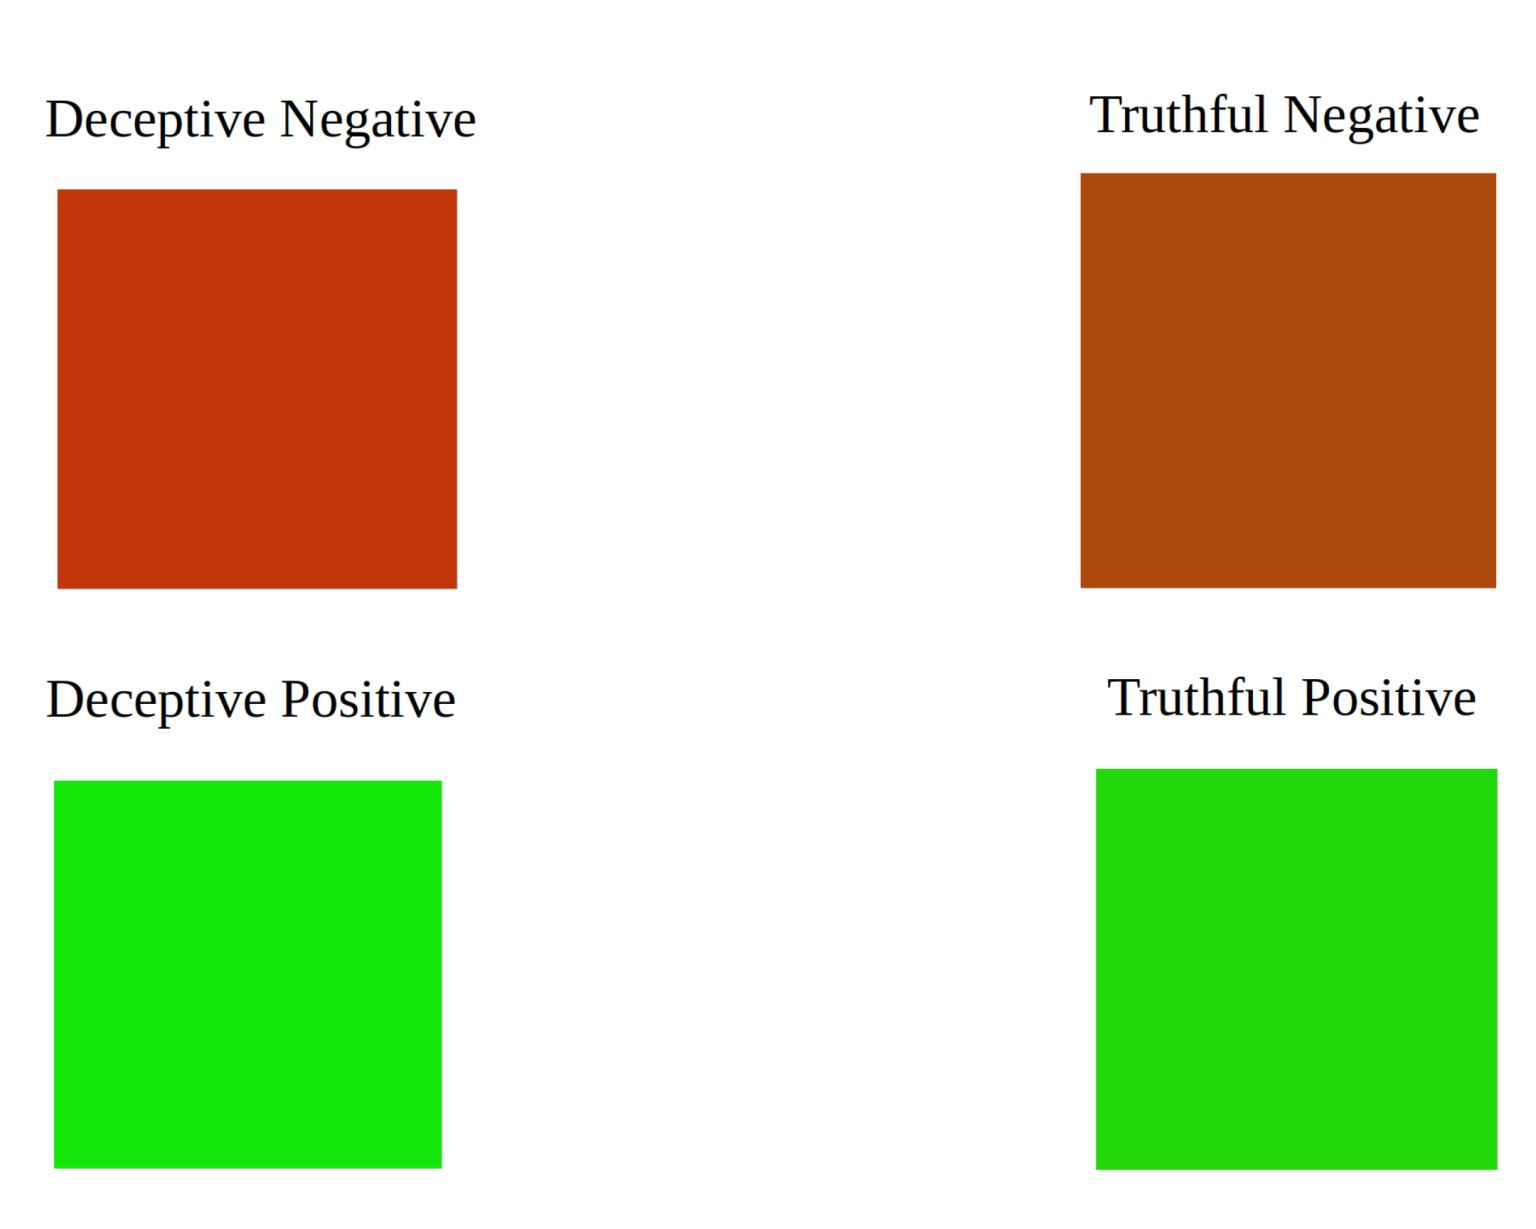 The image shows that truthful negative reviews aren’t as red as deceptive ones. And fake positive reviews are greener than the truthful comments.